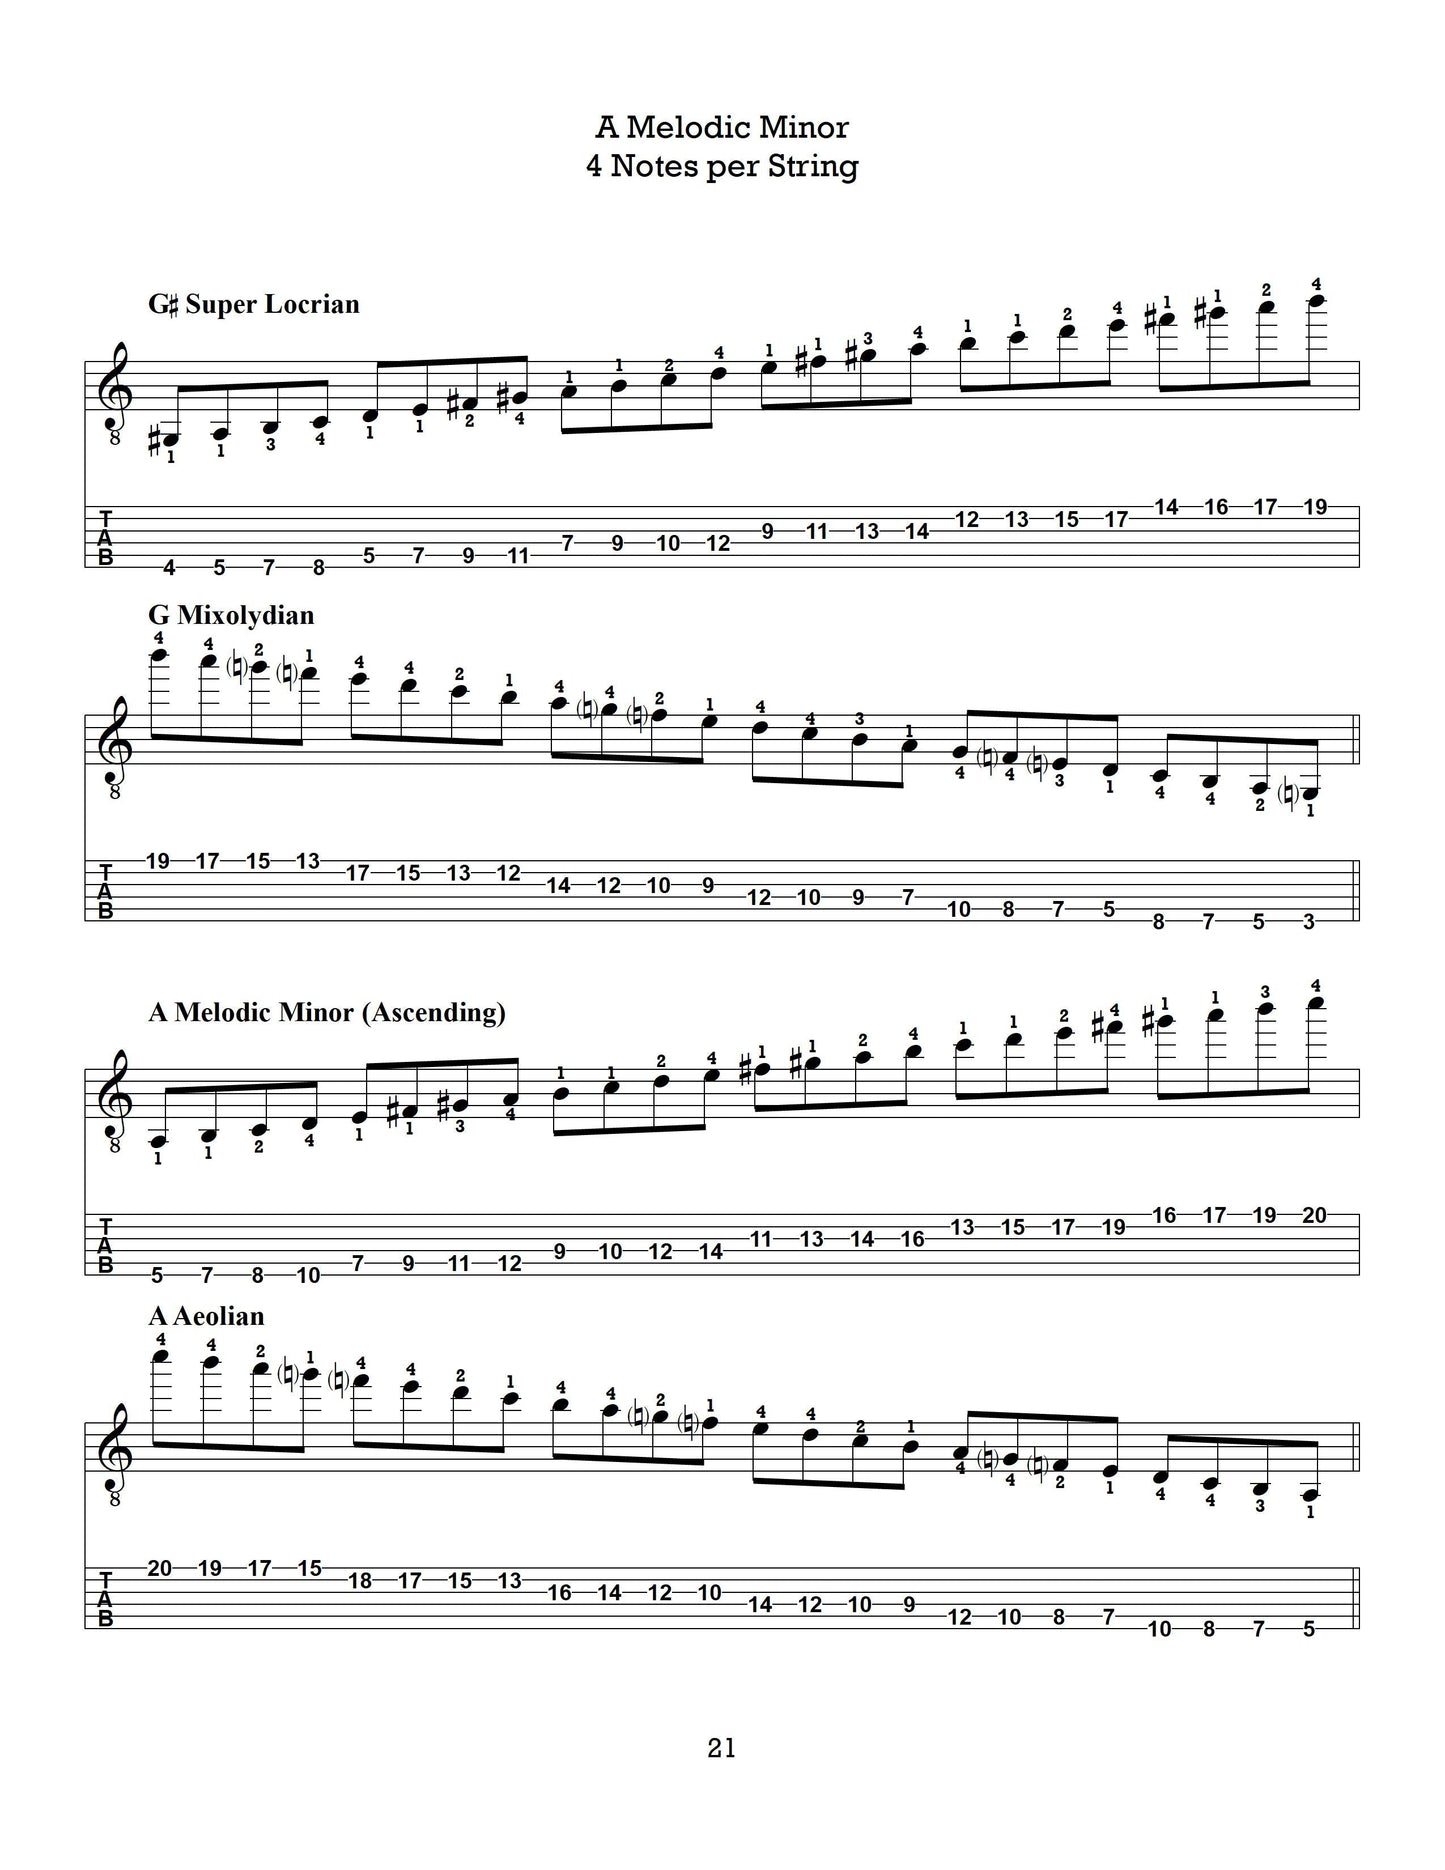 The Left-Hand Gauntlet, Volume 3: Melodic Minor Scales